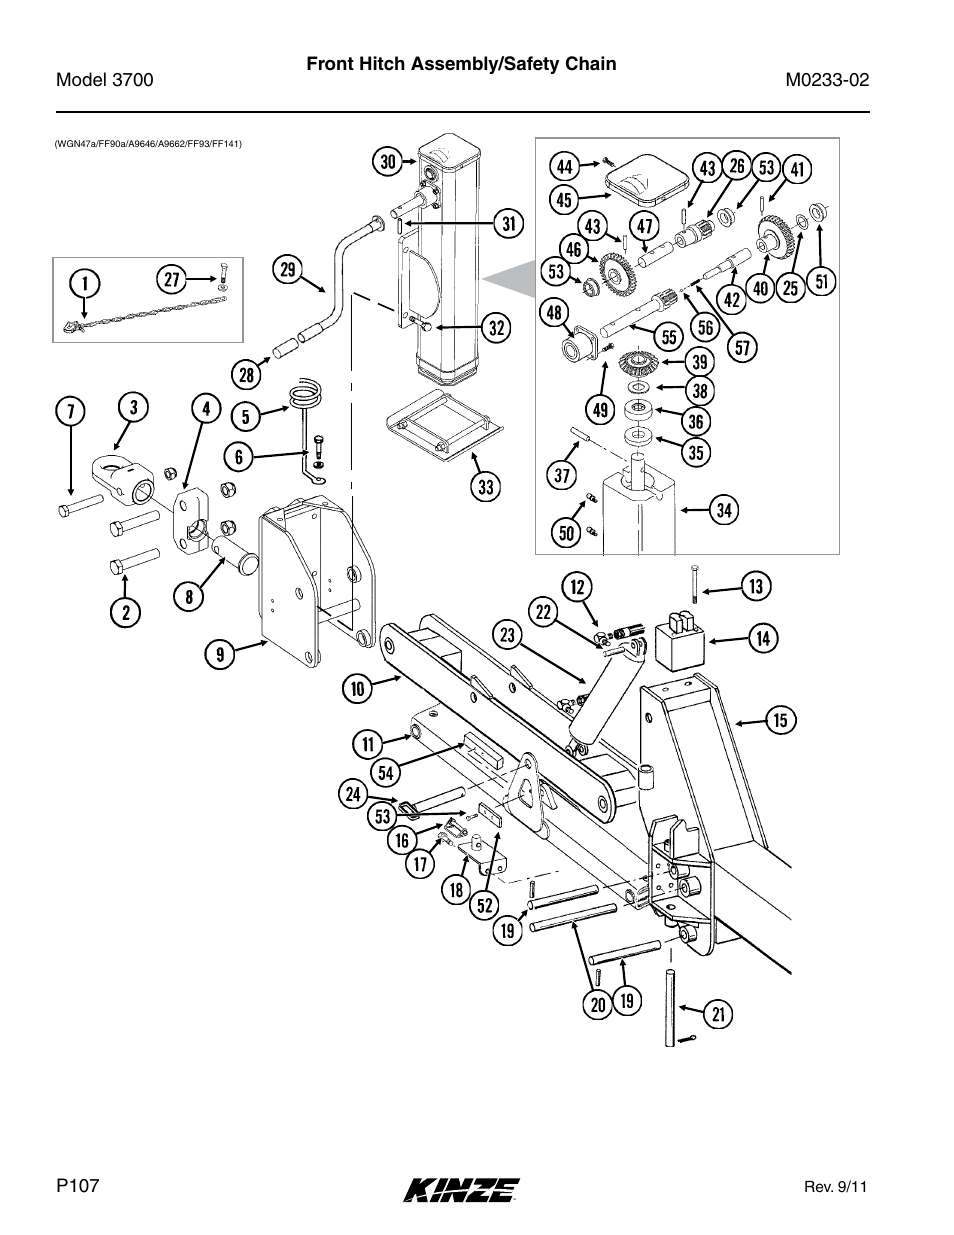 Base machine, Front hitch assembly/safety chain | Kinze 3700 Front Folding Planter Rev. 6/14 User Manual | Page 110 / 284